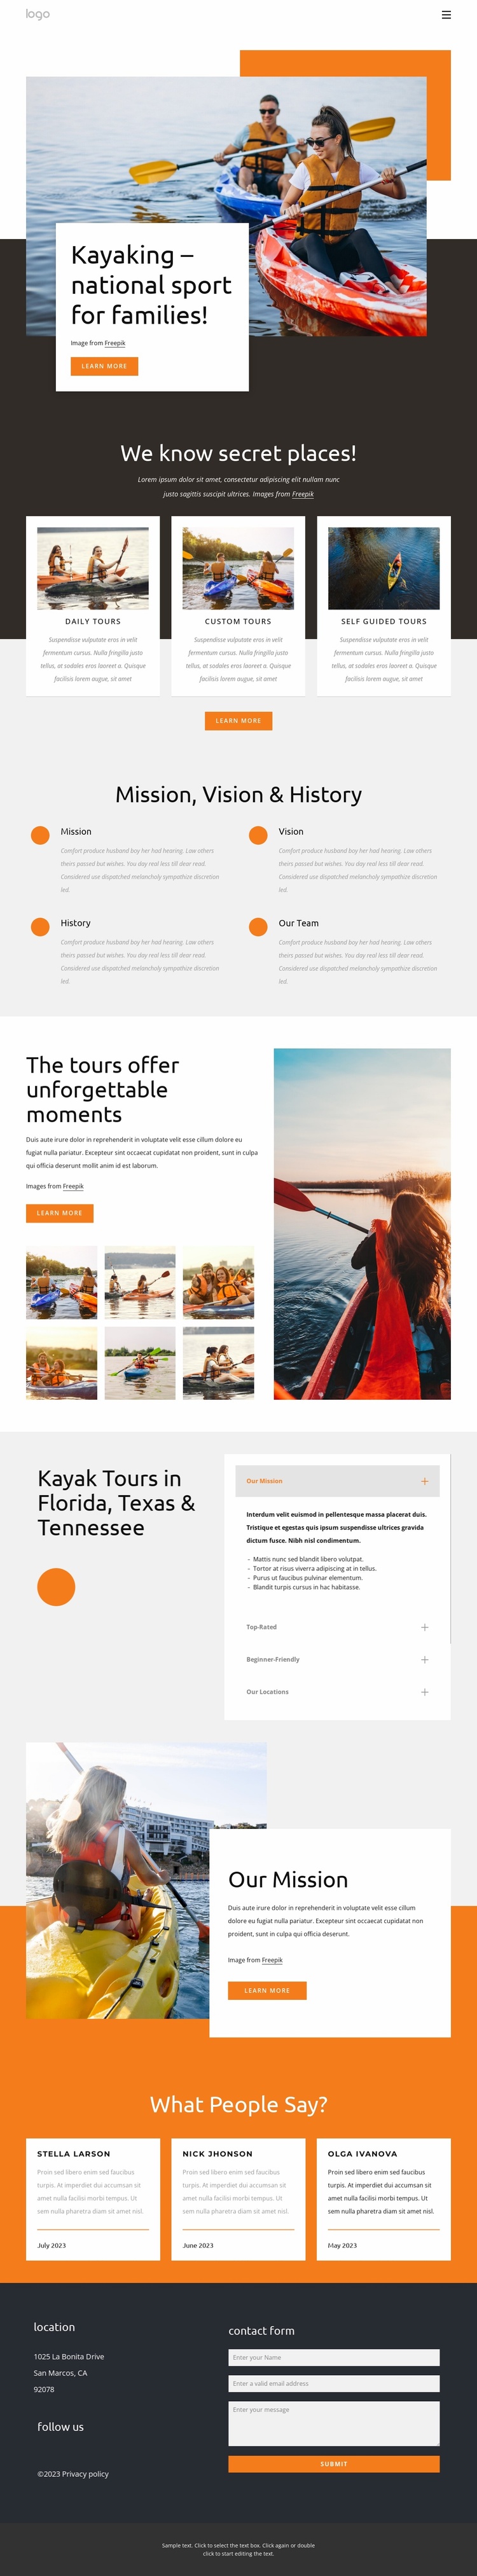 Kayaking - national sport for families Website Template